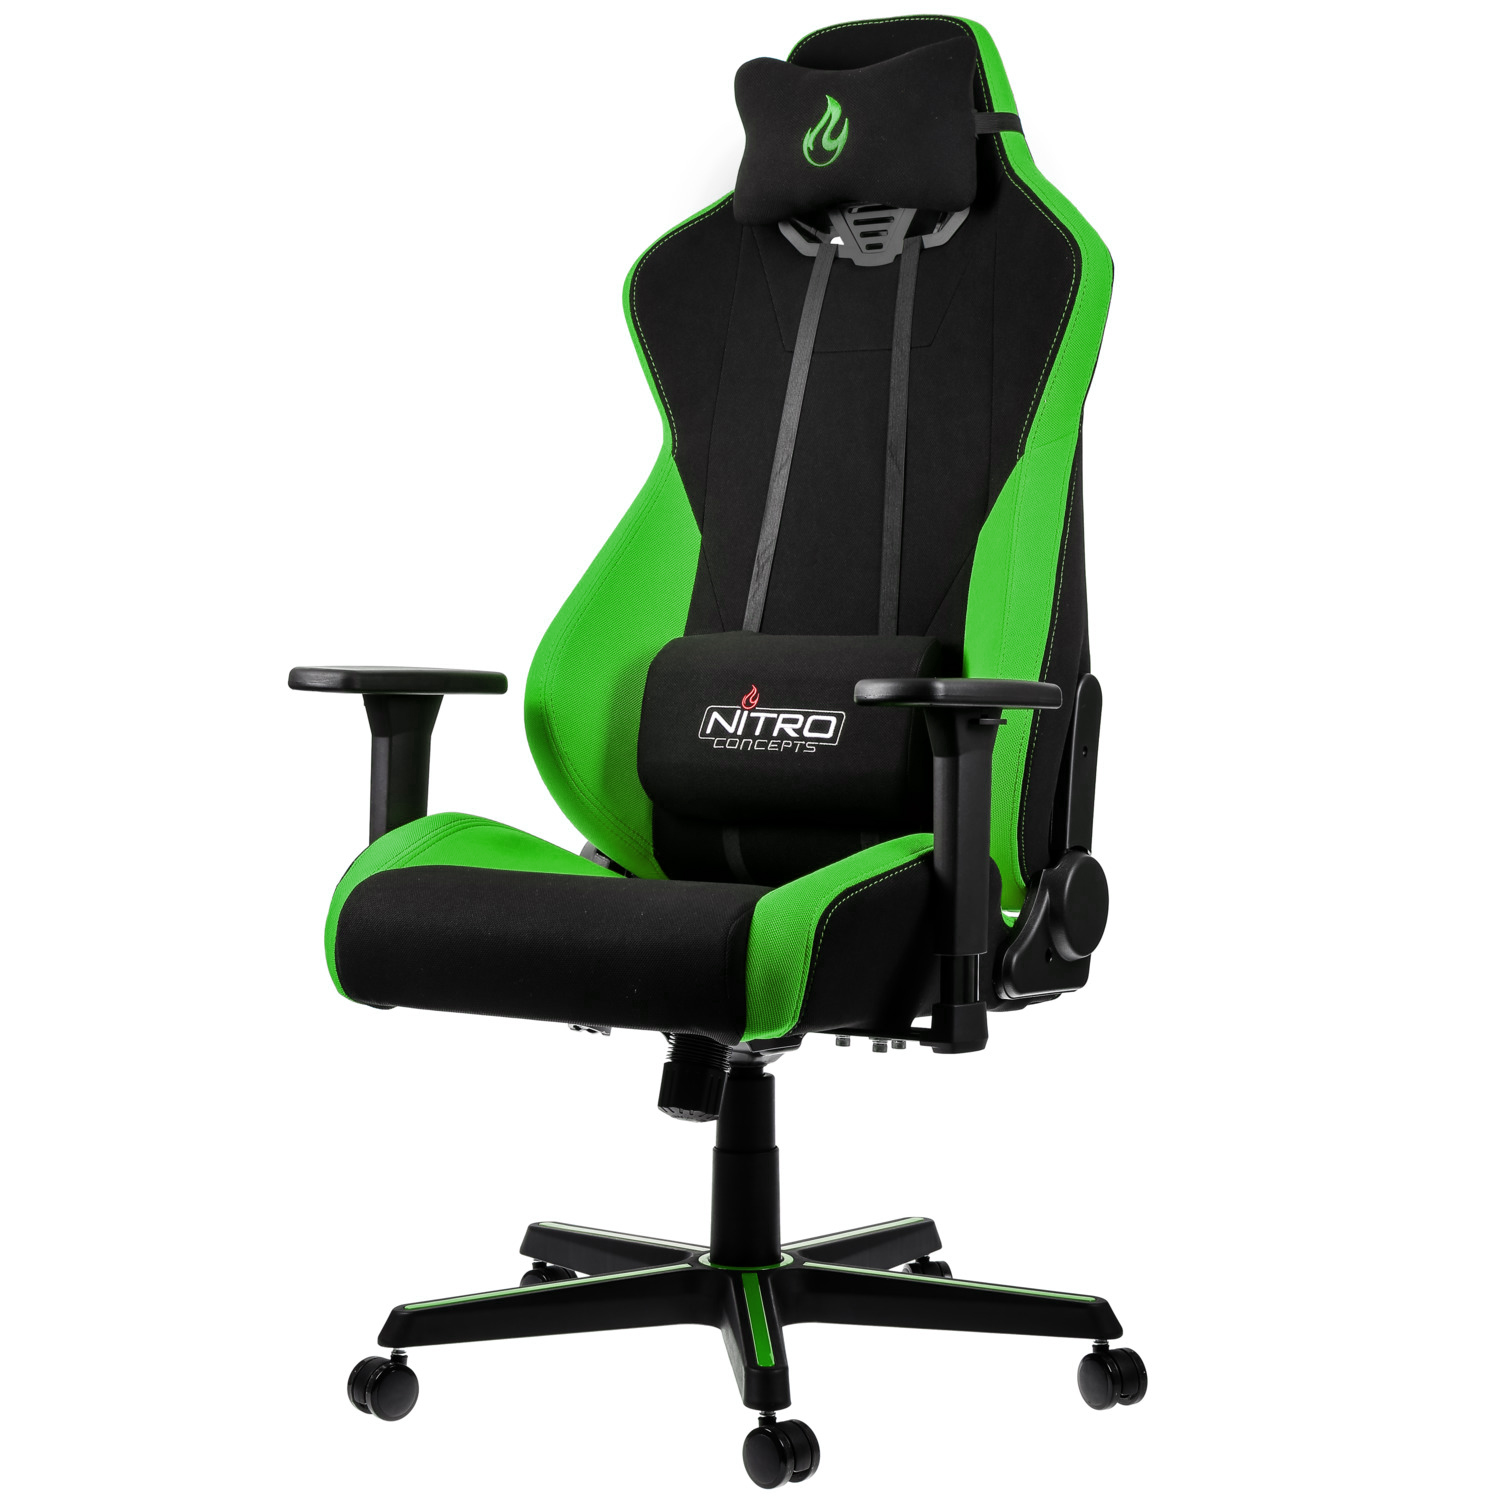 Nitro Concepts - S300 Gaming Chair - Atomic Green